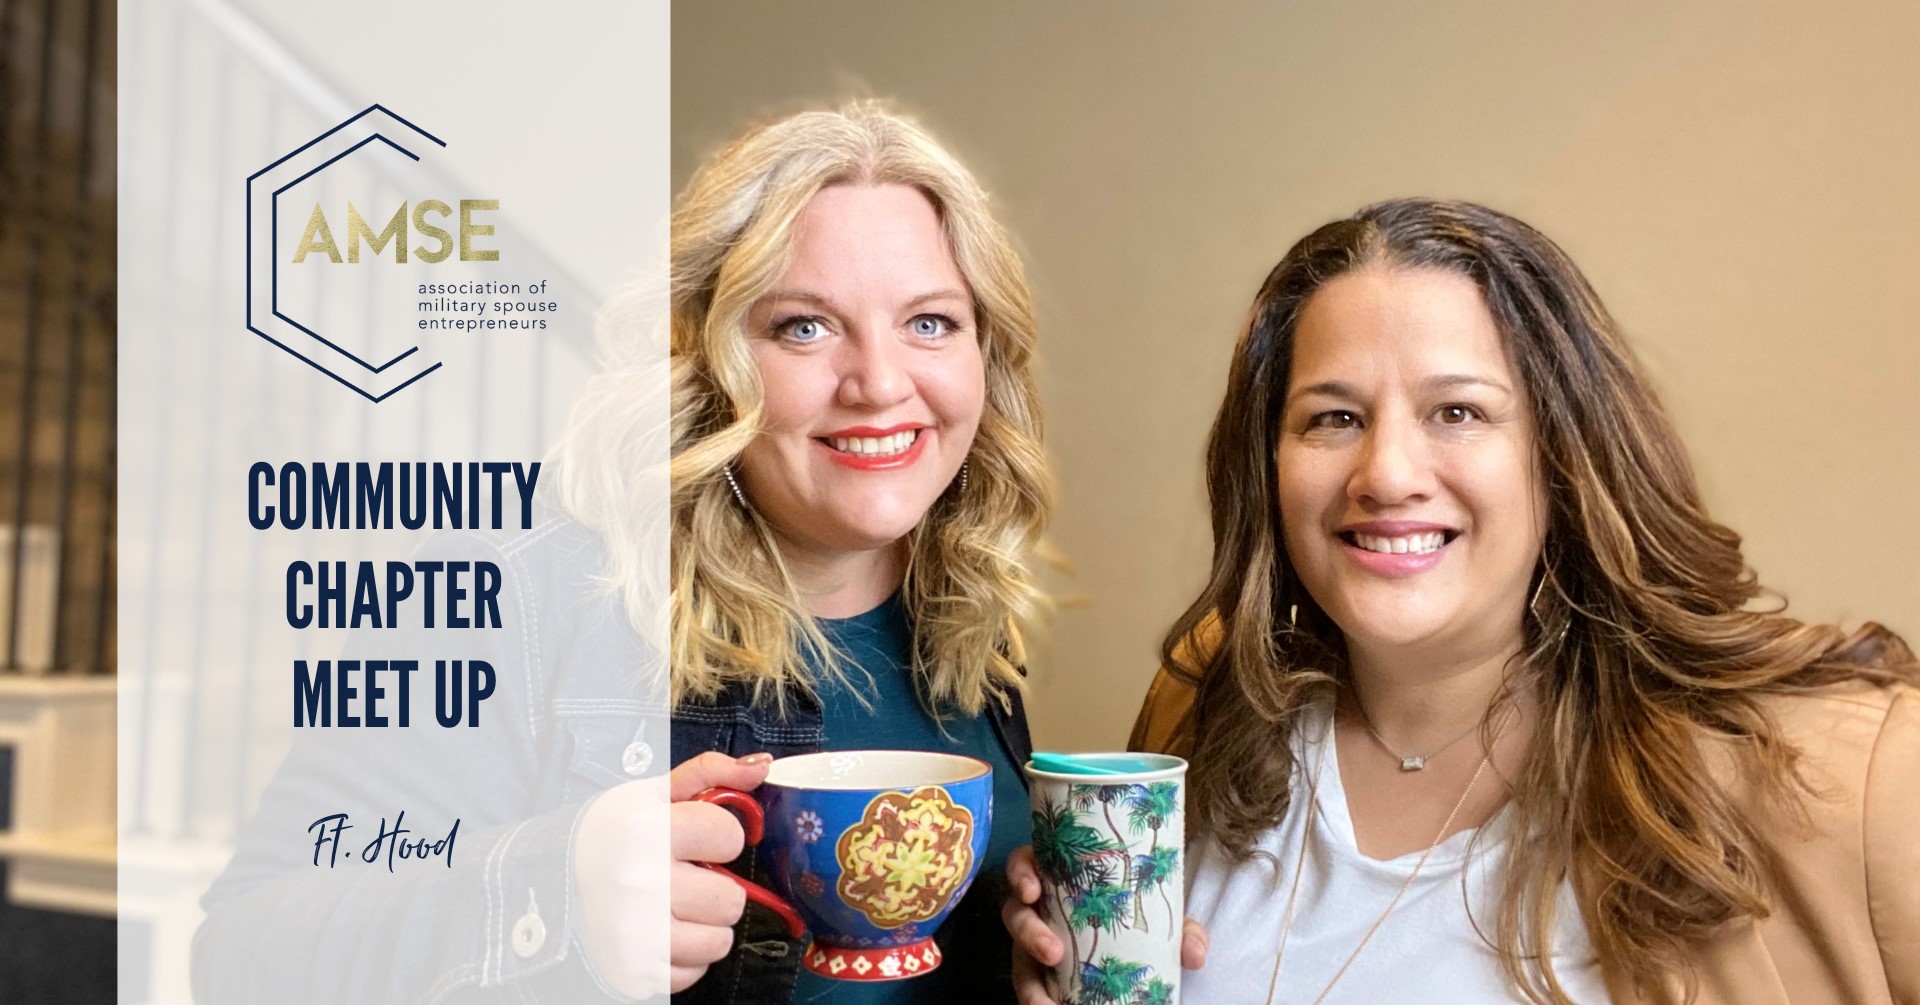 Anna Larson + Selena Conmackie holding cups of coffee with "Community Chapter Meetup, Ft Hood" in text and AMSE logo